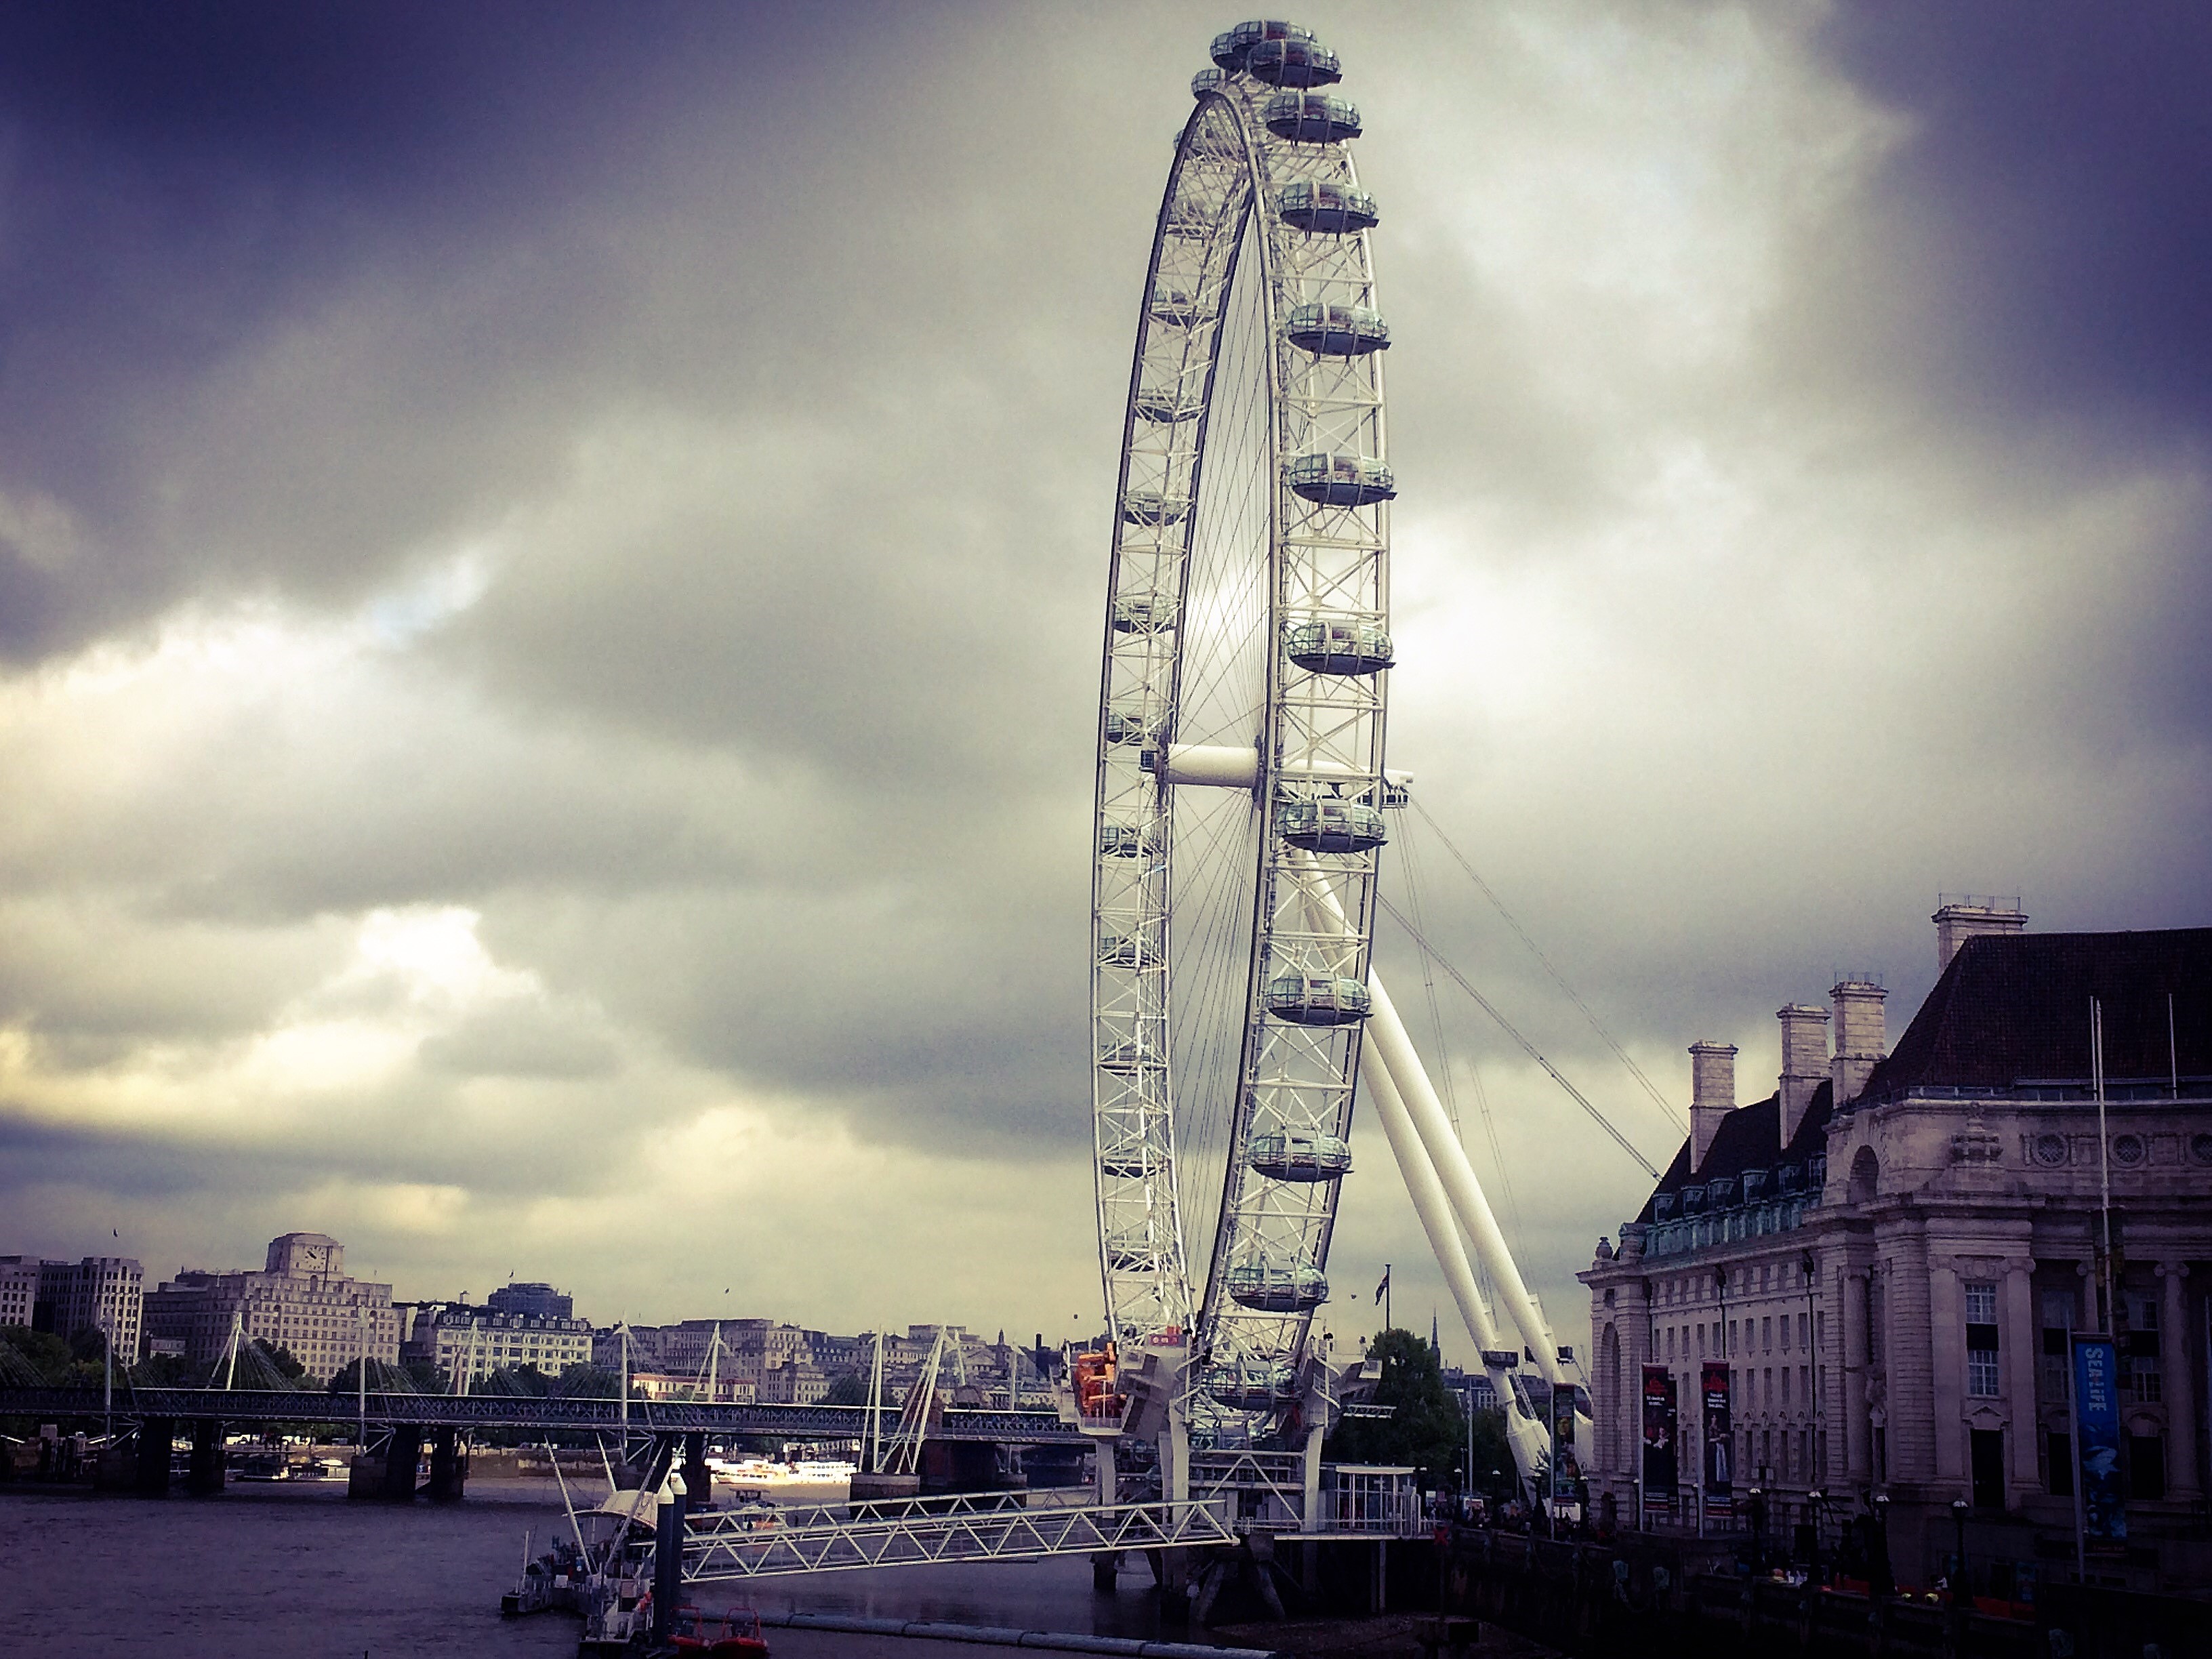 Visit London in 2 Days - Unique Itinerary - pic by Erika Price